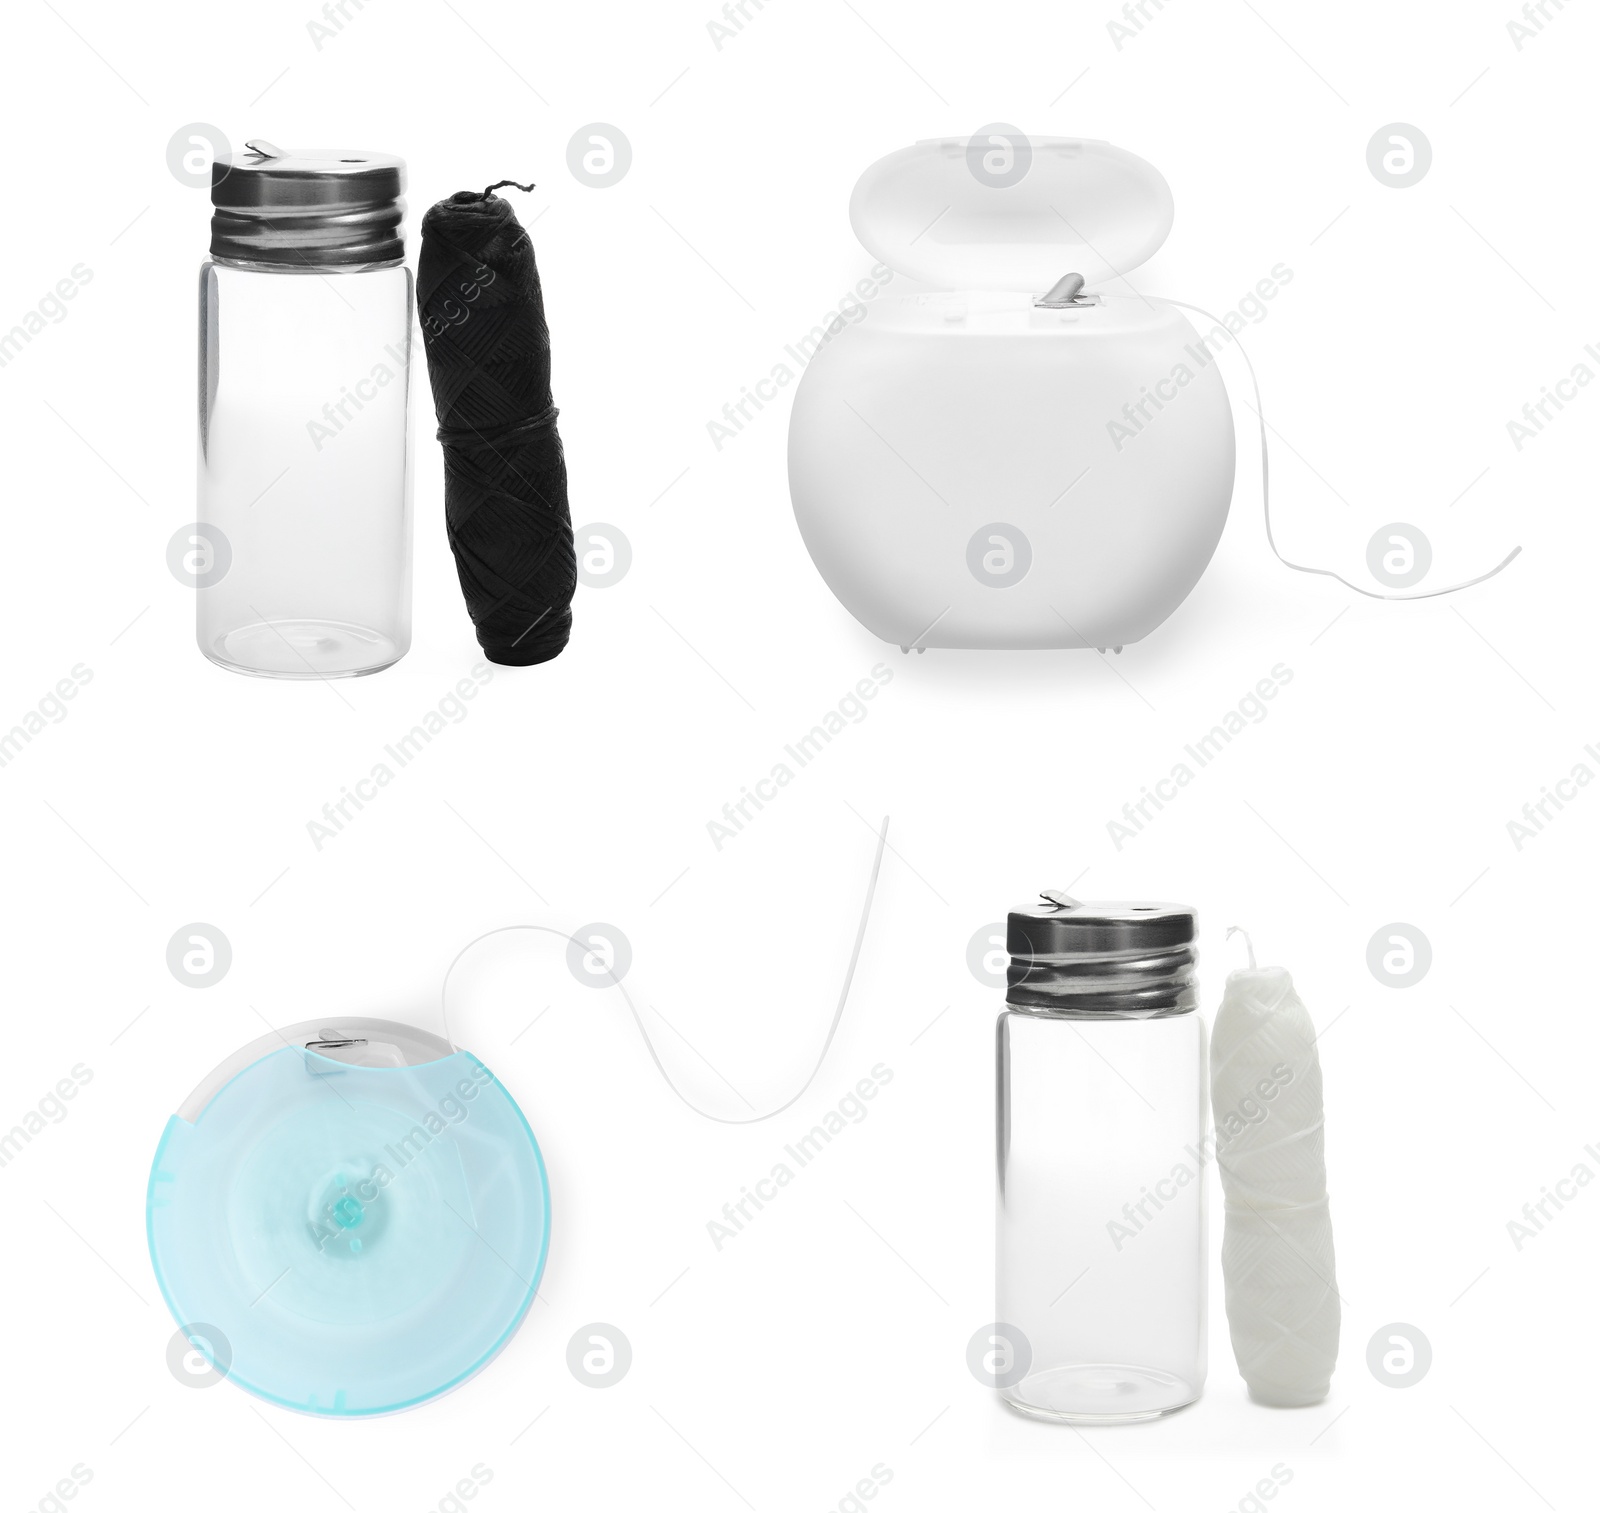 Image of Set of different dental flosses on white background